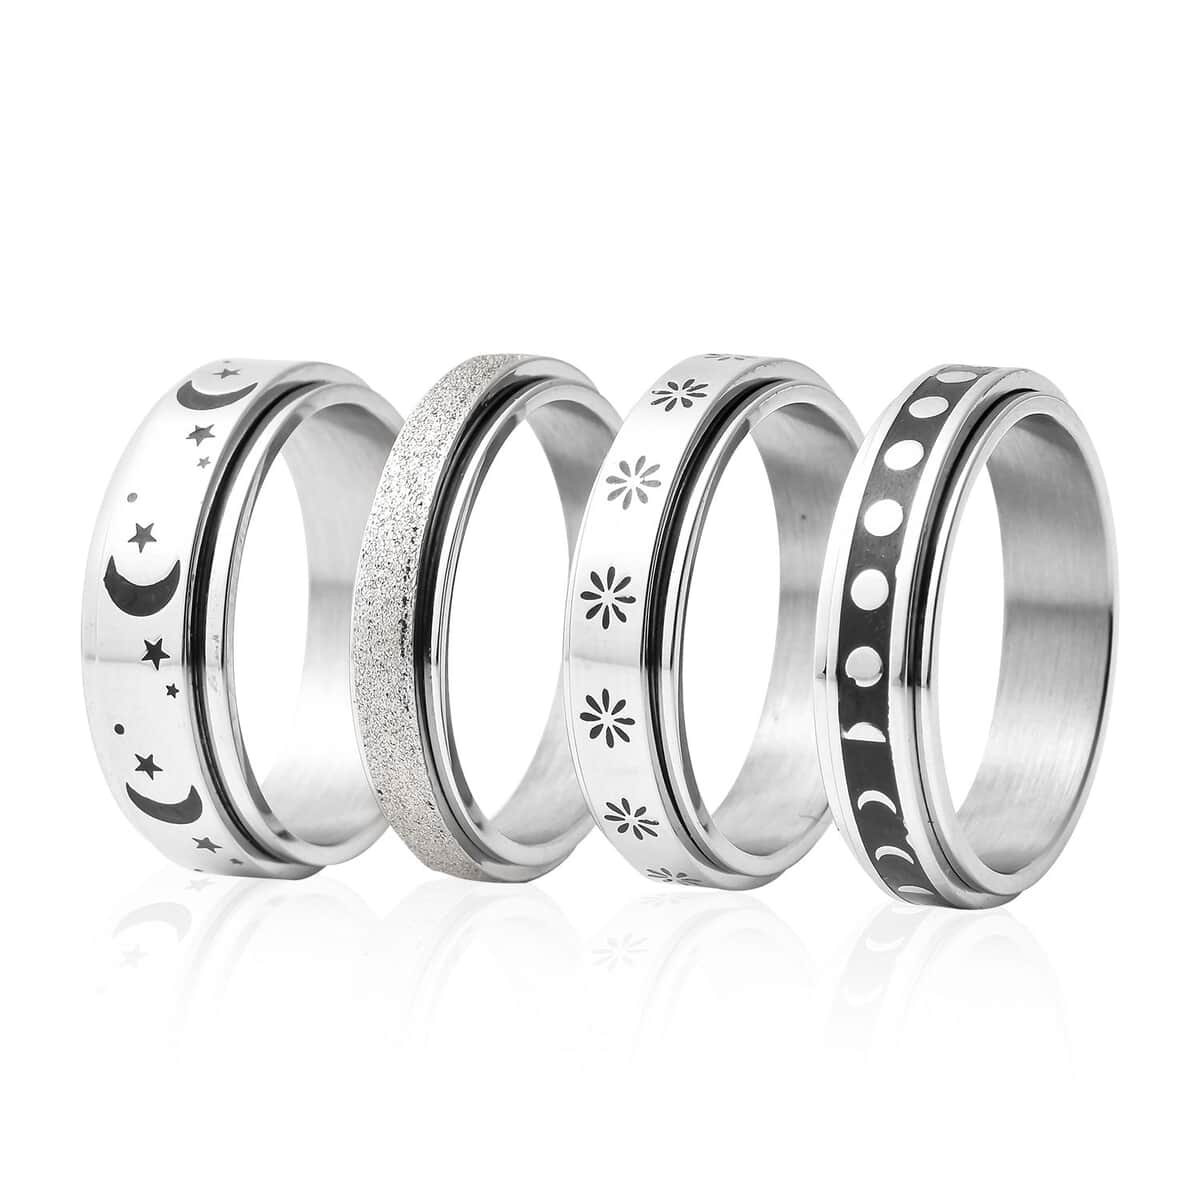 Set of 4 Stress Buster Spinner Ring in Stainless Steel (Size 9.0) image number 4